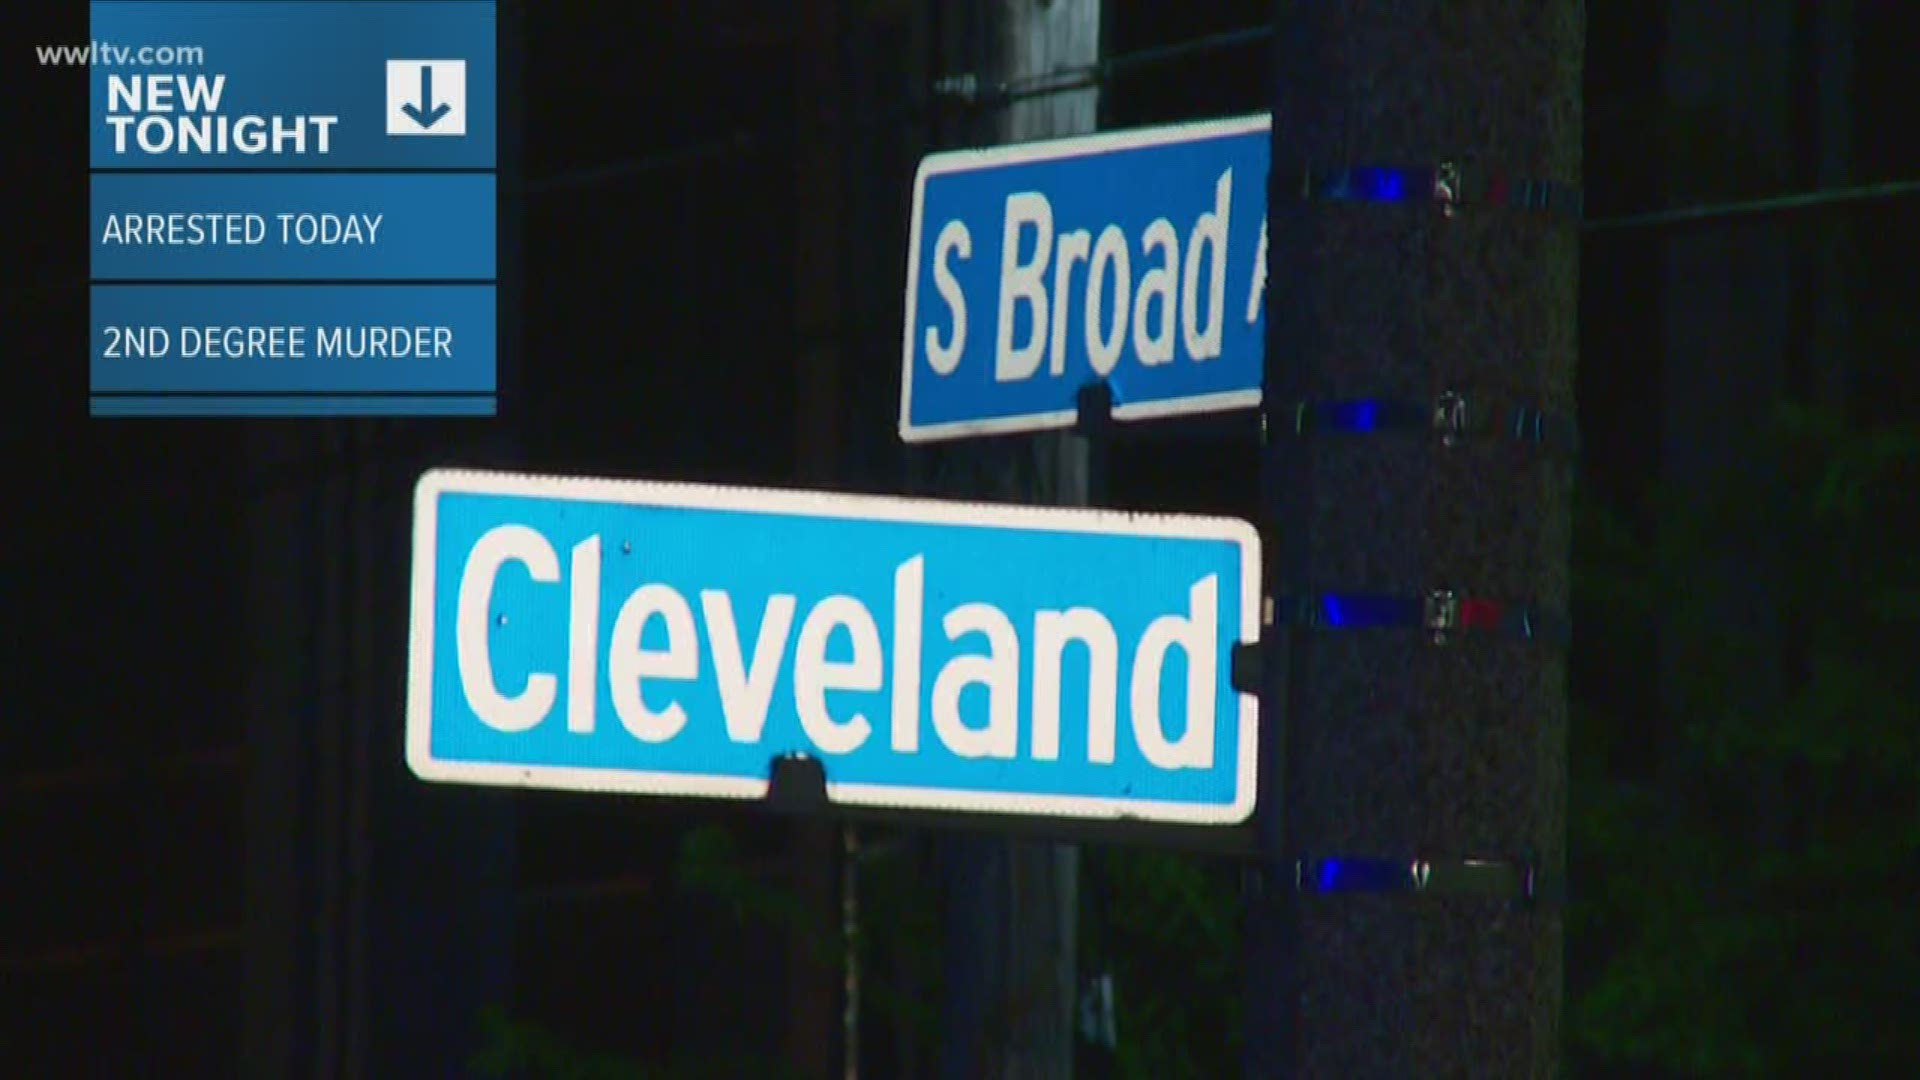 It's the third arrest connected to last week's shooting of a couple as they were being carjacked near Broad St.